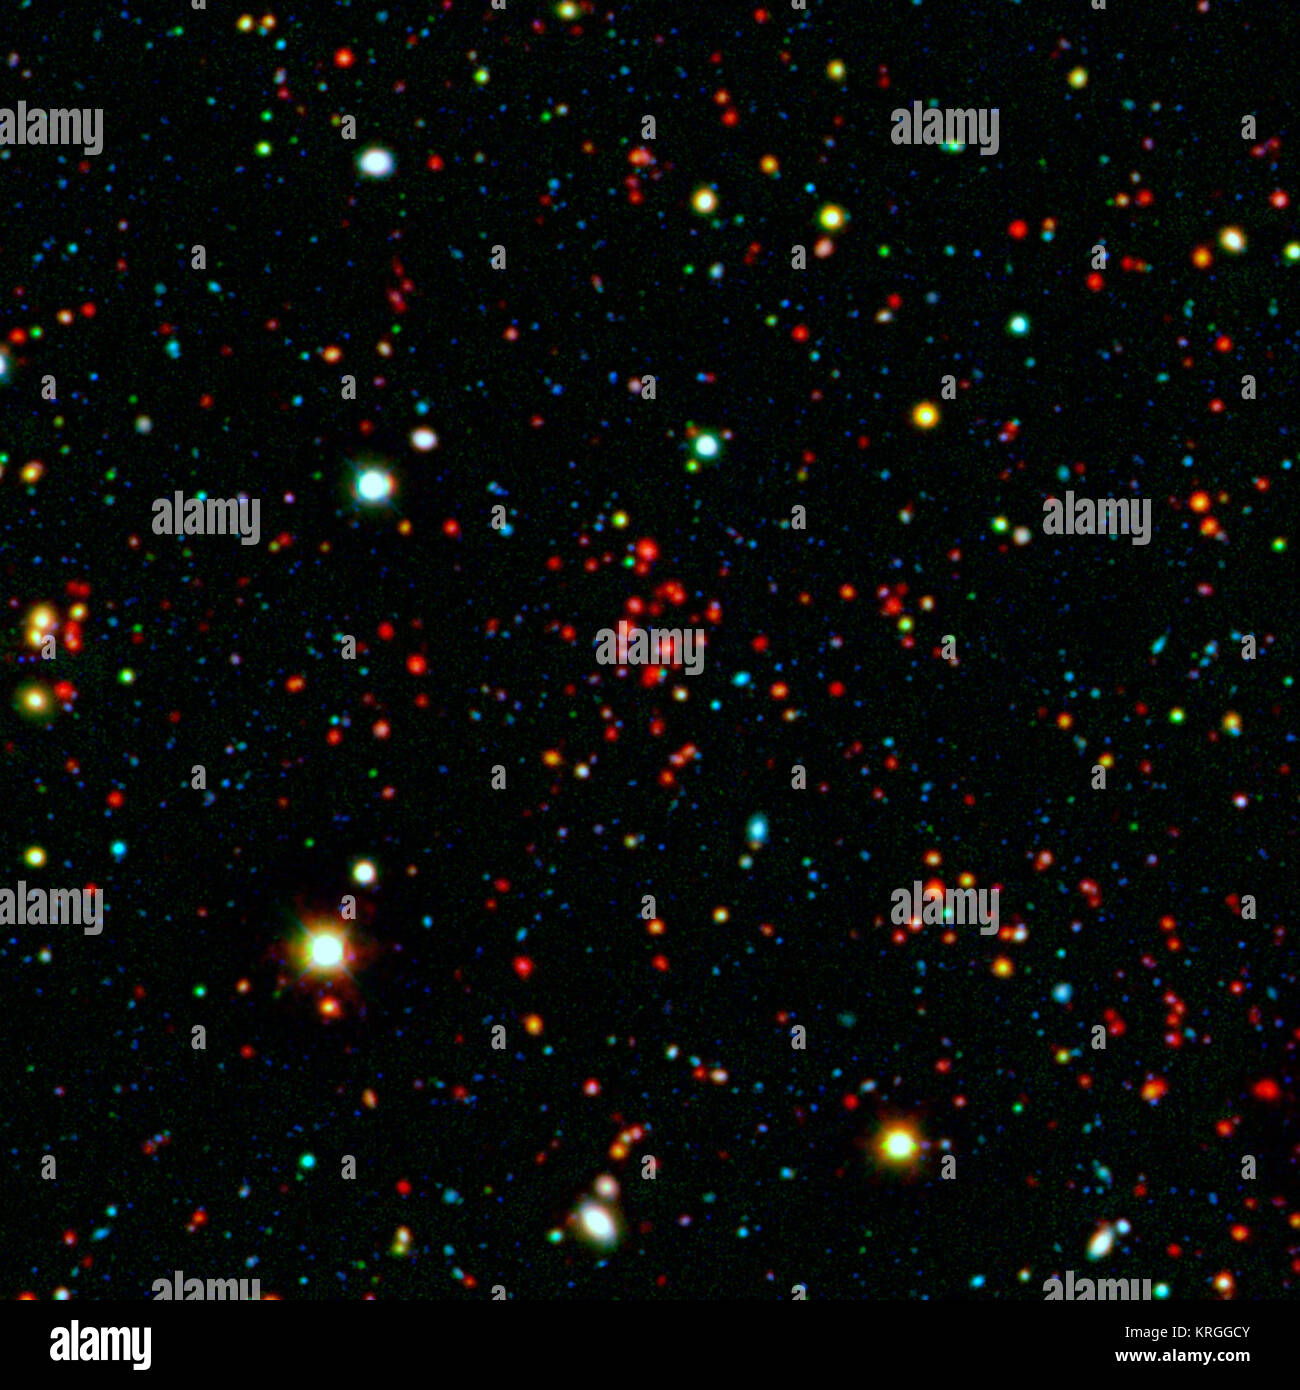 The collection of red dots seen near the center of this image show one of several very distant galaxy clusters discovered by combining ground-based optical data from the National Optical Astronomy Observatory's Kitt Peak National Observatory with infrared data from NASA's Spitzer Space Telescope. This galaxy cluster, named ISCS J1434.7+3519, is located about 9 billion light-years from Earth.   The large white and yellow dots in this picture are stars in our galaxy, while the rest of the smaller dots are distant galaxies. The cluster, comprised of red dots near the center, includes more than 10 Stock Photo